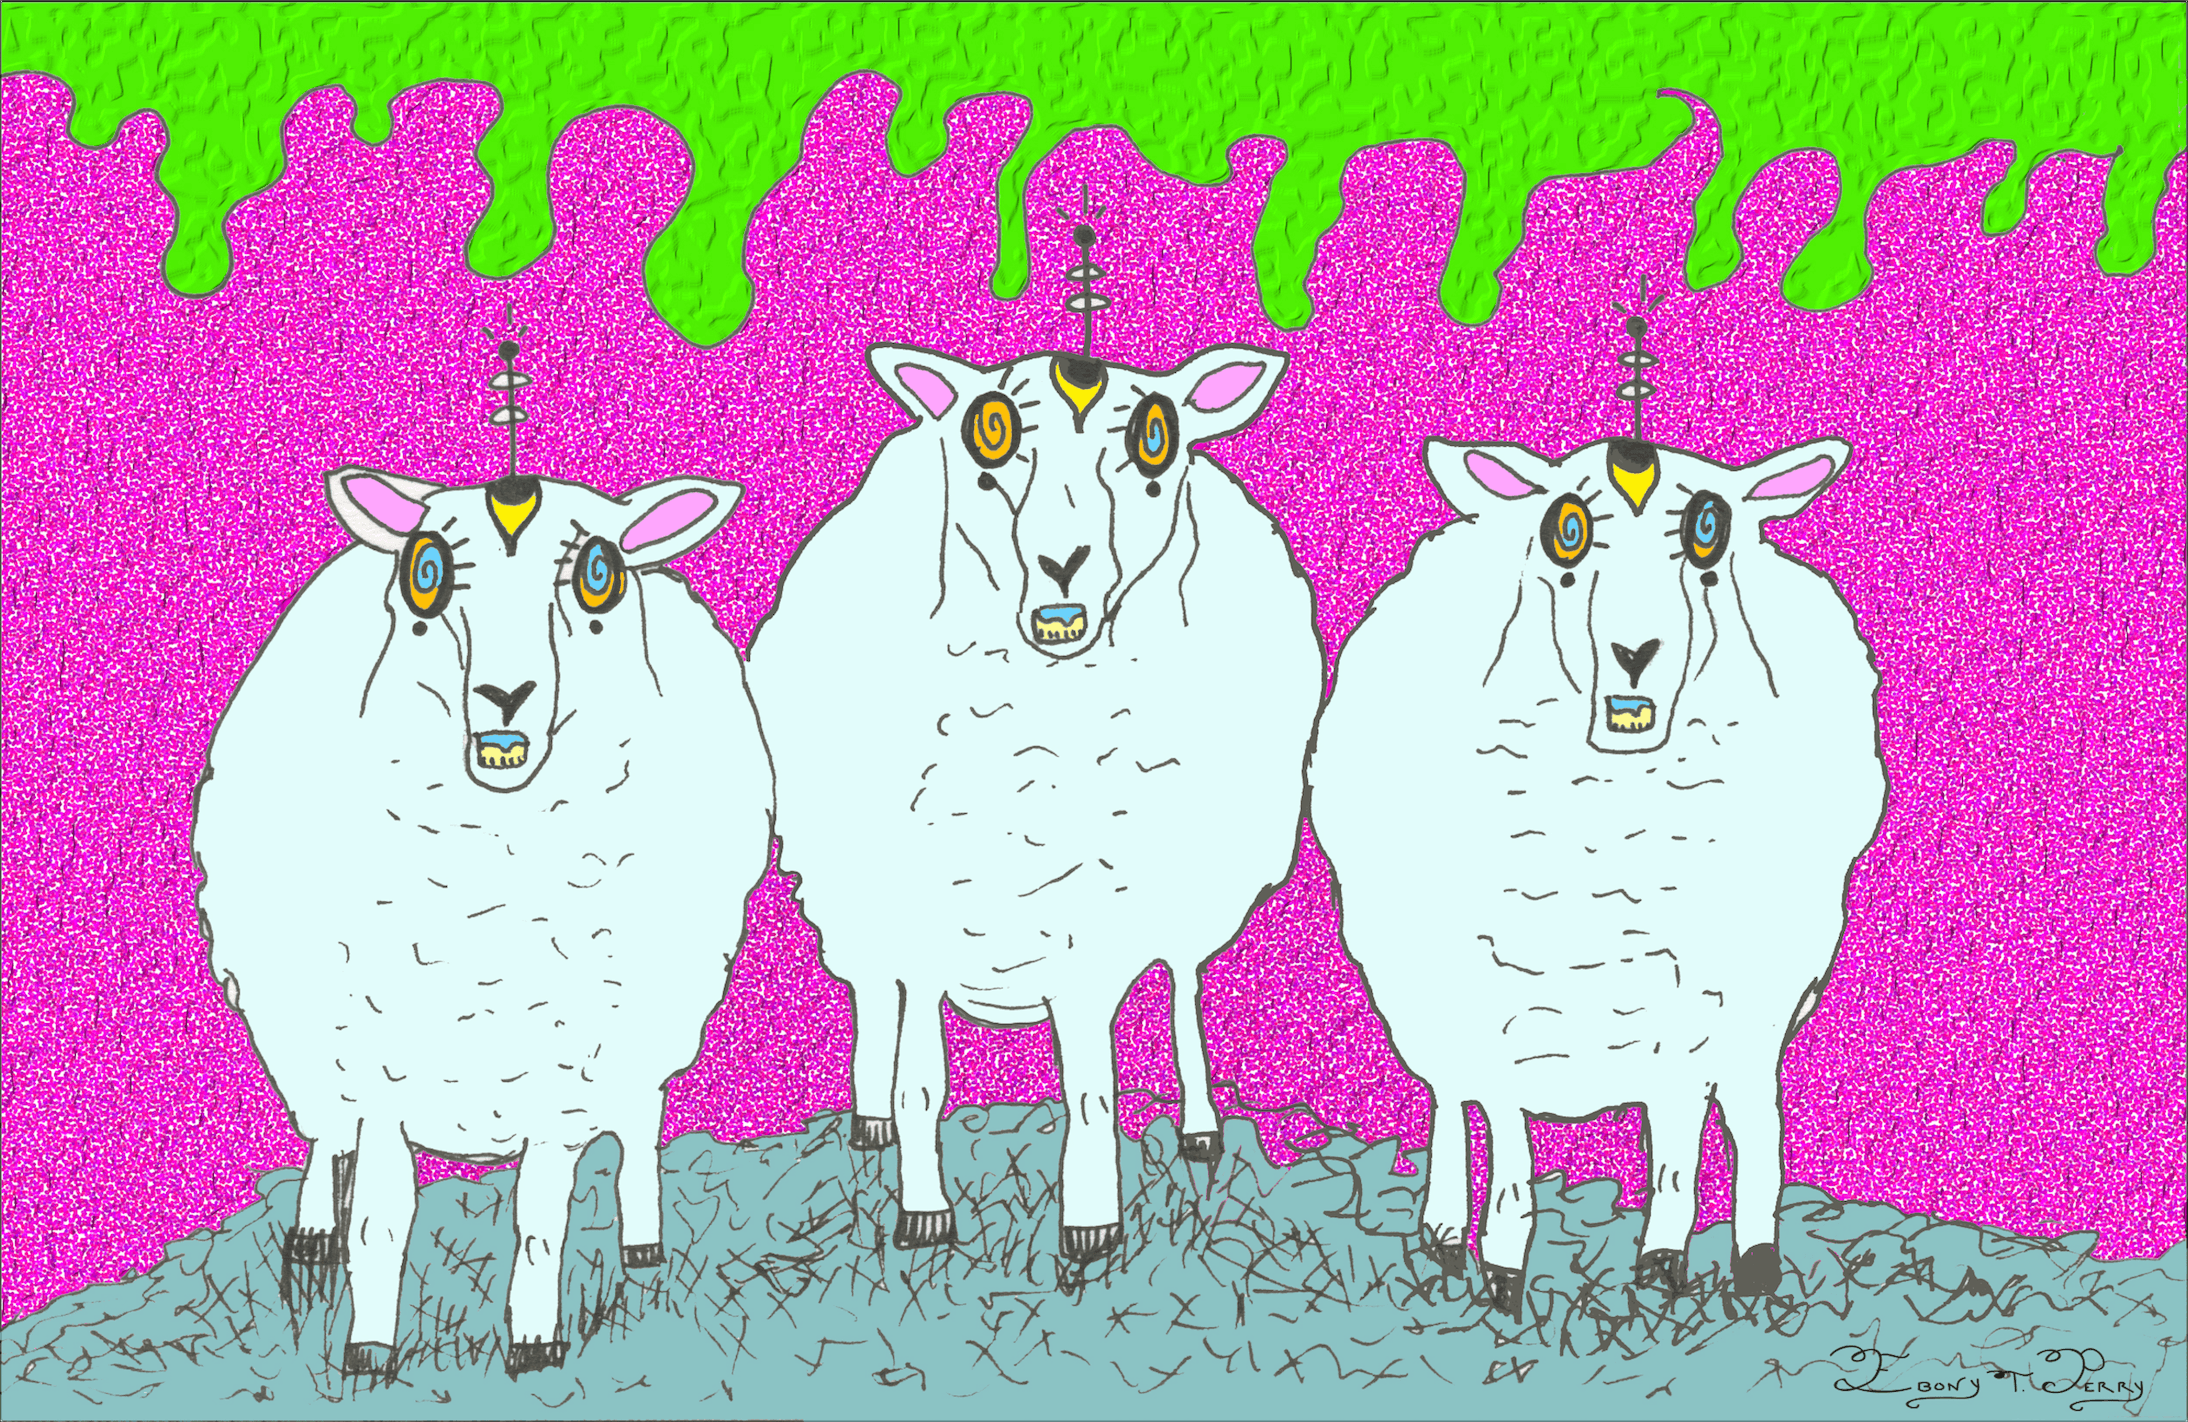 12_We the Sheep.png